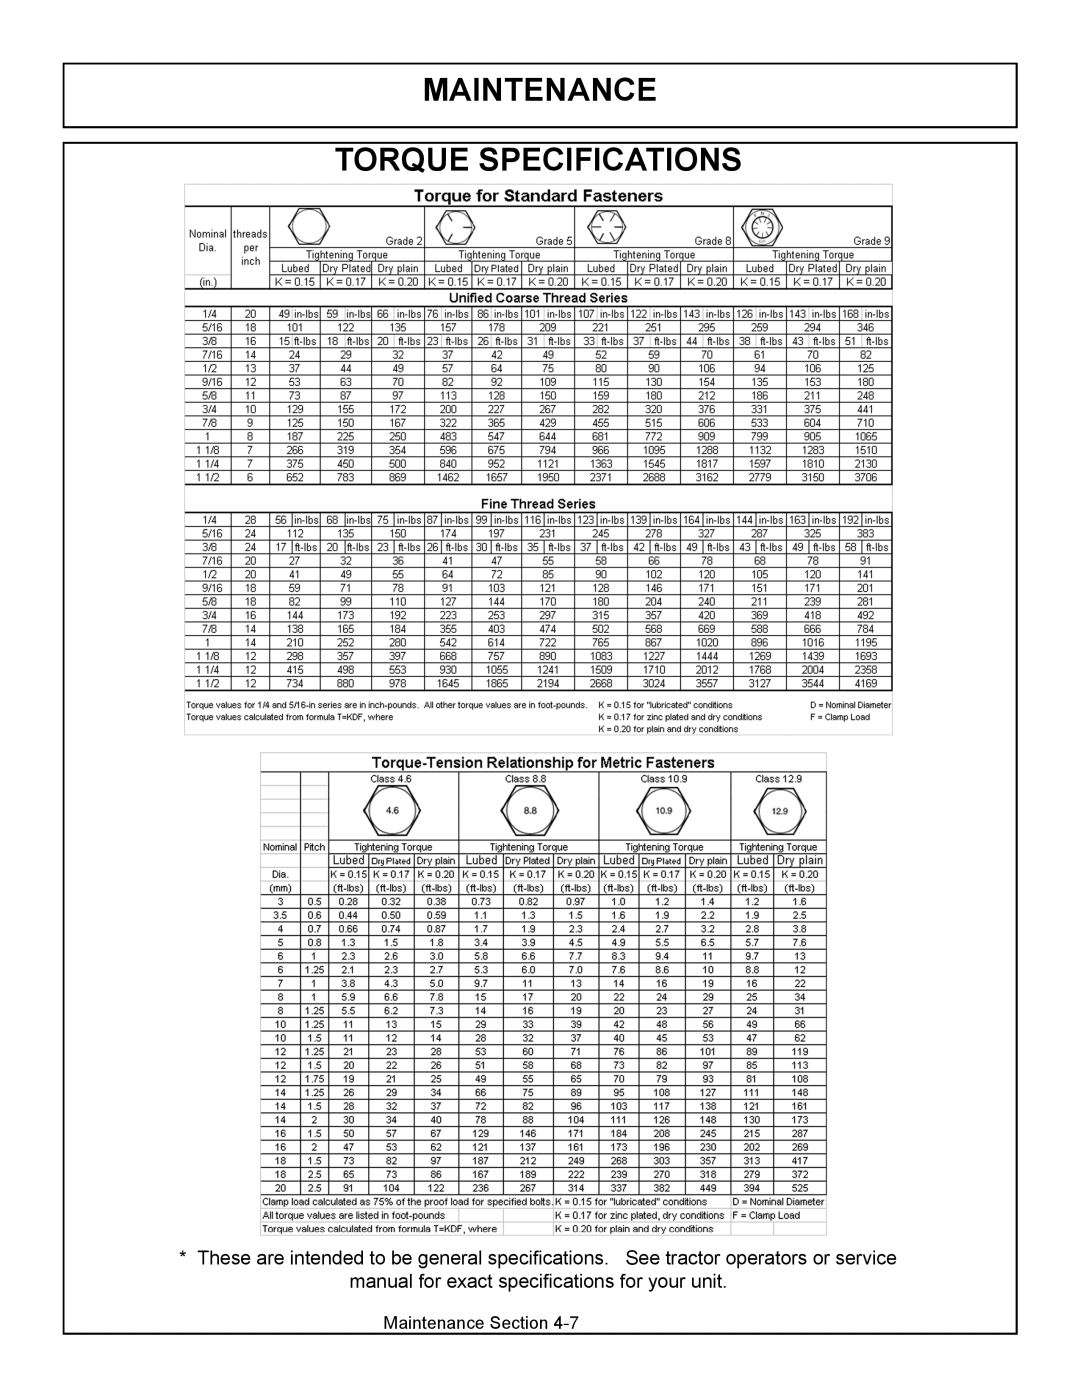 Tiger Products Co., Ltd JD 72-7520 manual Maintenance Torque Specifications, Maintenance Section 